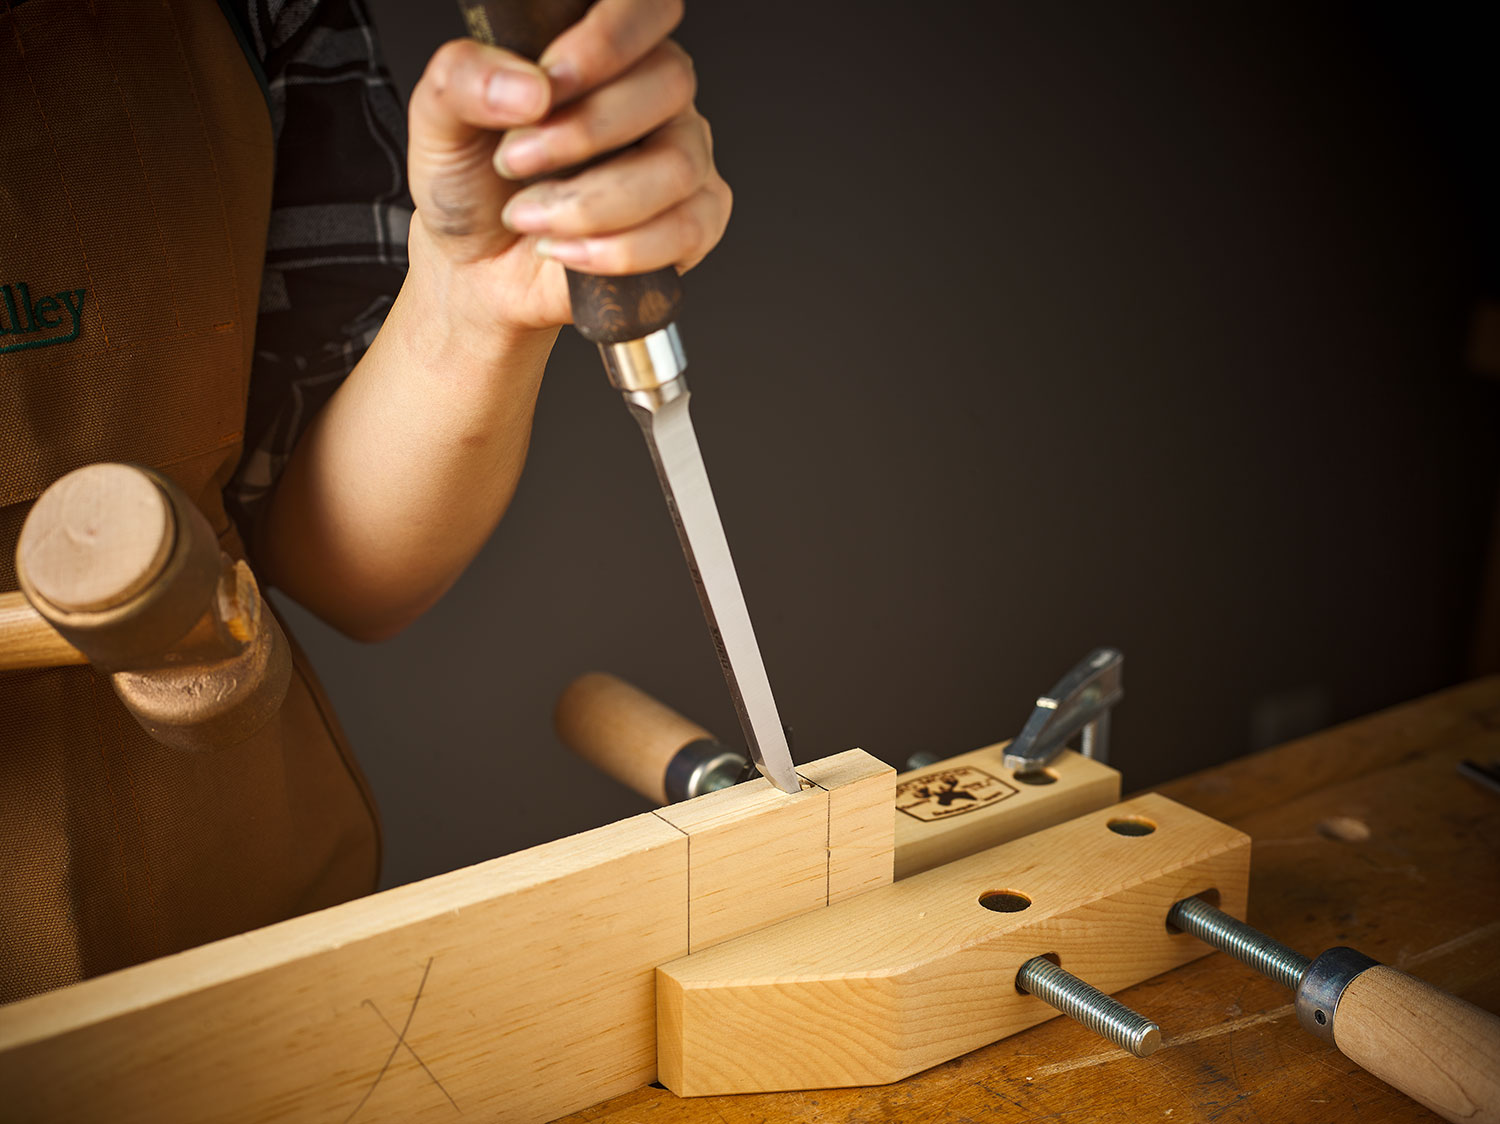 A mortise is being cut into a board using a Narex mortise chisel and a mallet.